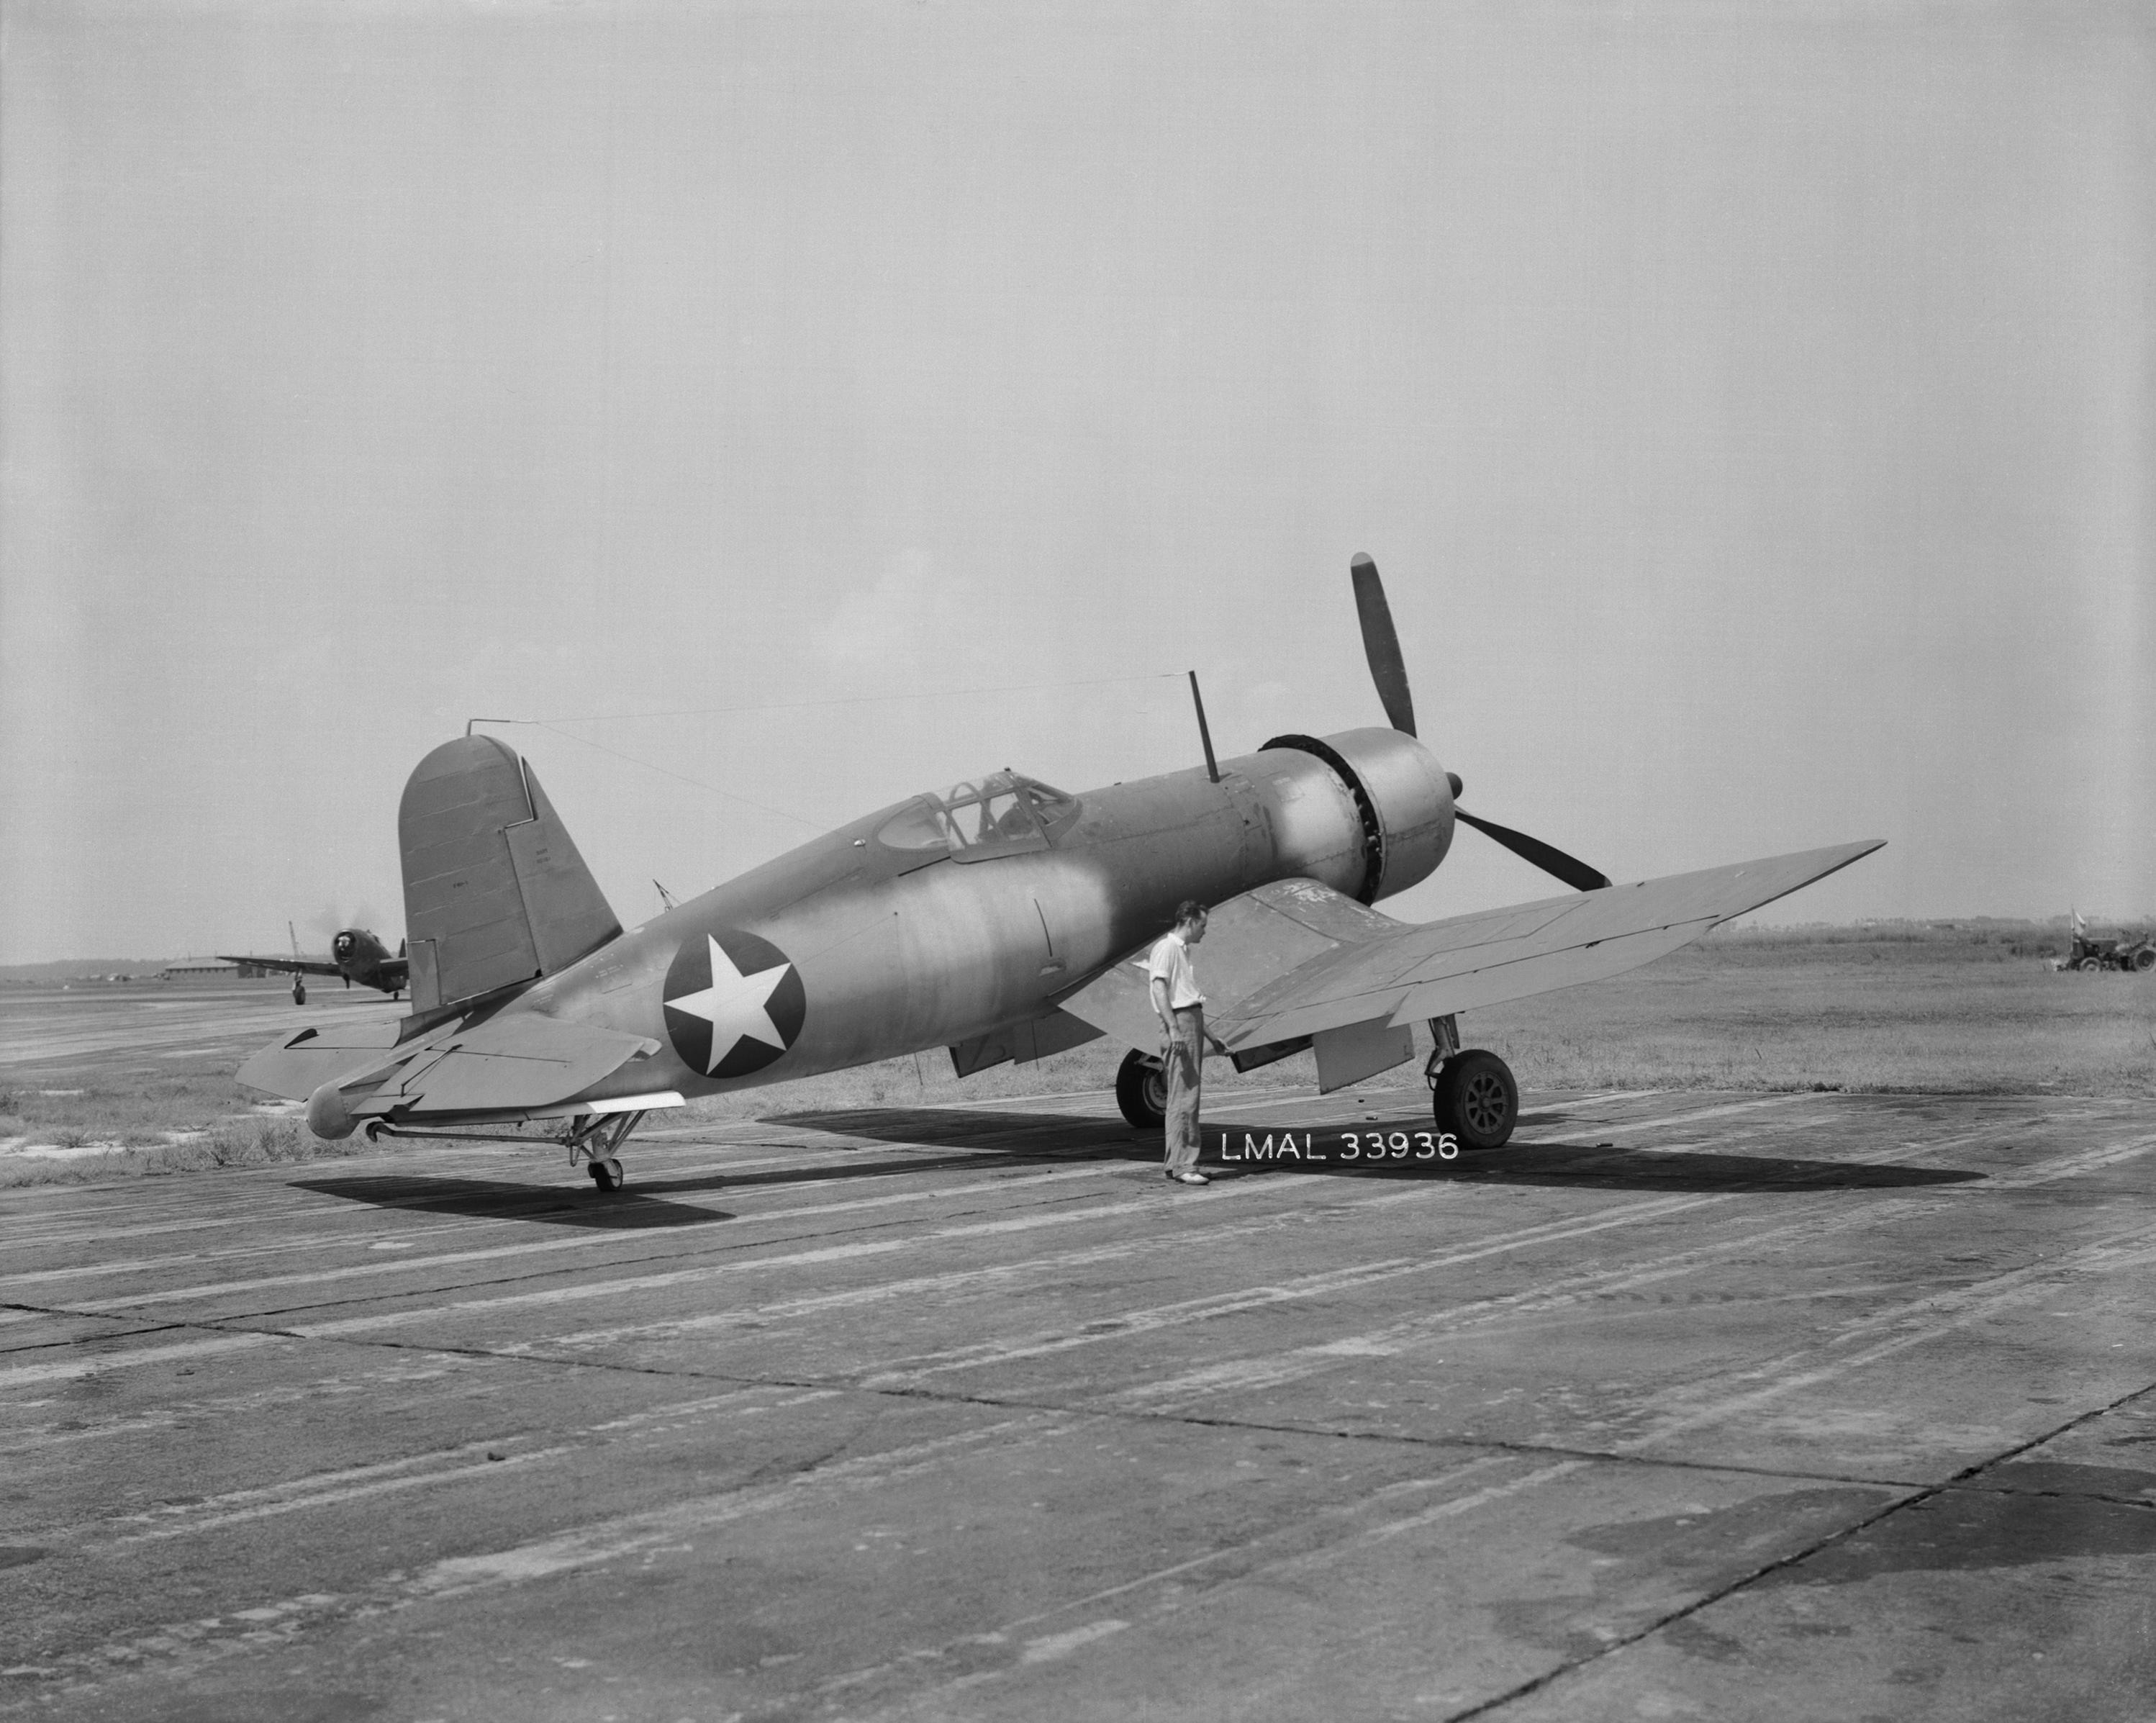 F4U-1 Corsair fighter at Langley Research Center at Hampton, Virginia, United States, 31 Jul 1943. Note the P-47 Thunderbolt on the taxi way behind the Corsair's tail.